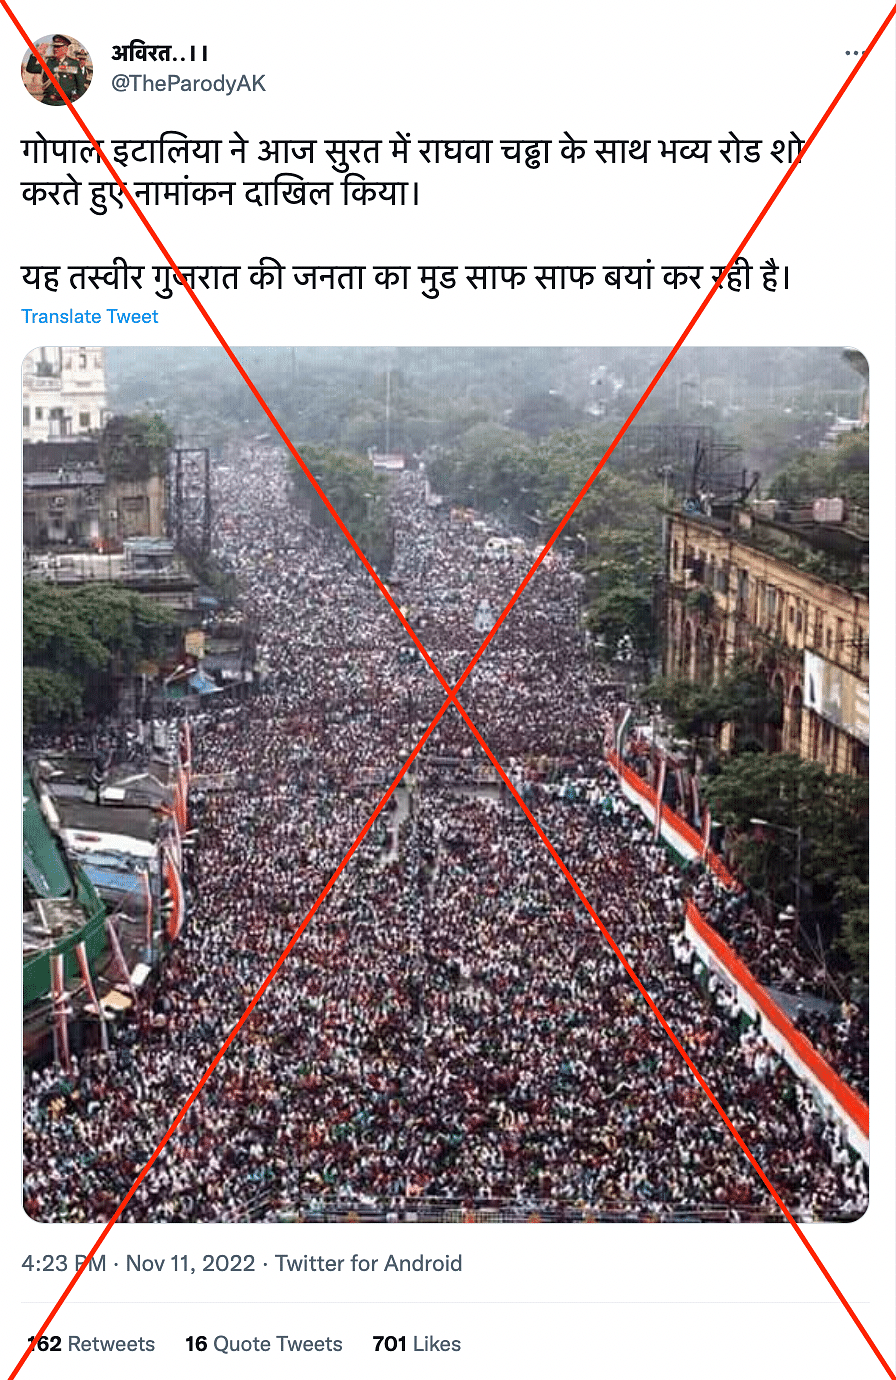 The photo shows massive crowds attending the commemoration of Martyr's Day in West Bengal's Kolkata in 2017.